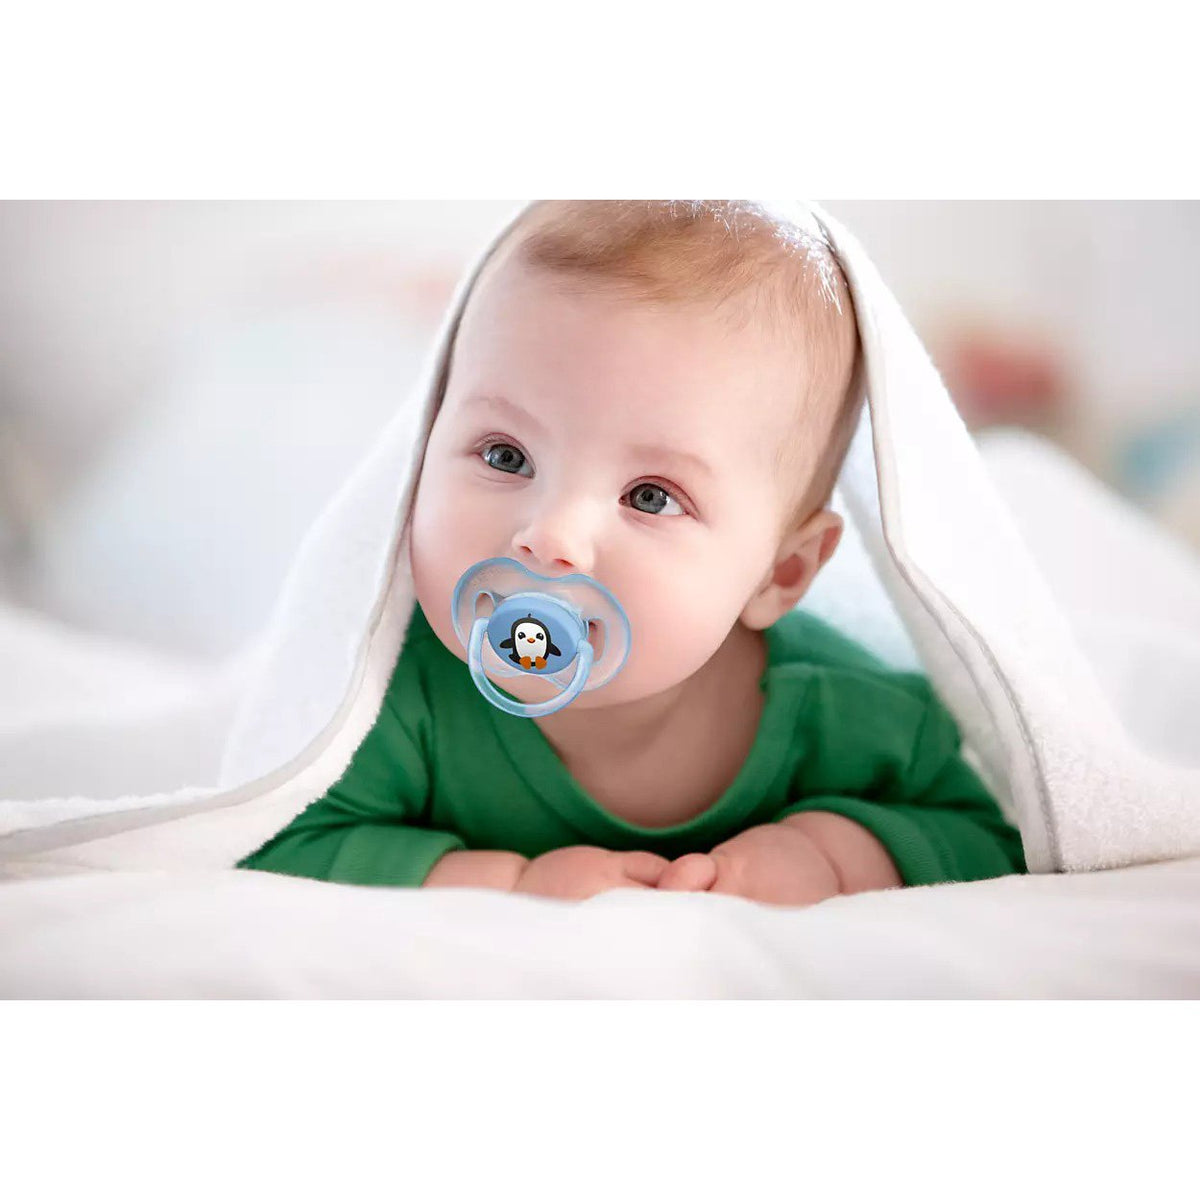 philips-avent-classic-pacifier- (6)